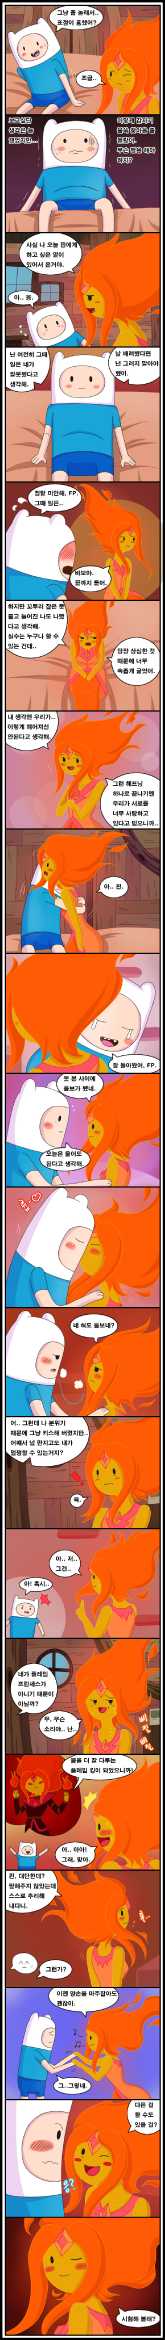 [WB] Adult Time 3 (Adventure Time) [Korean] - Page 3